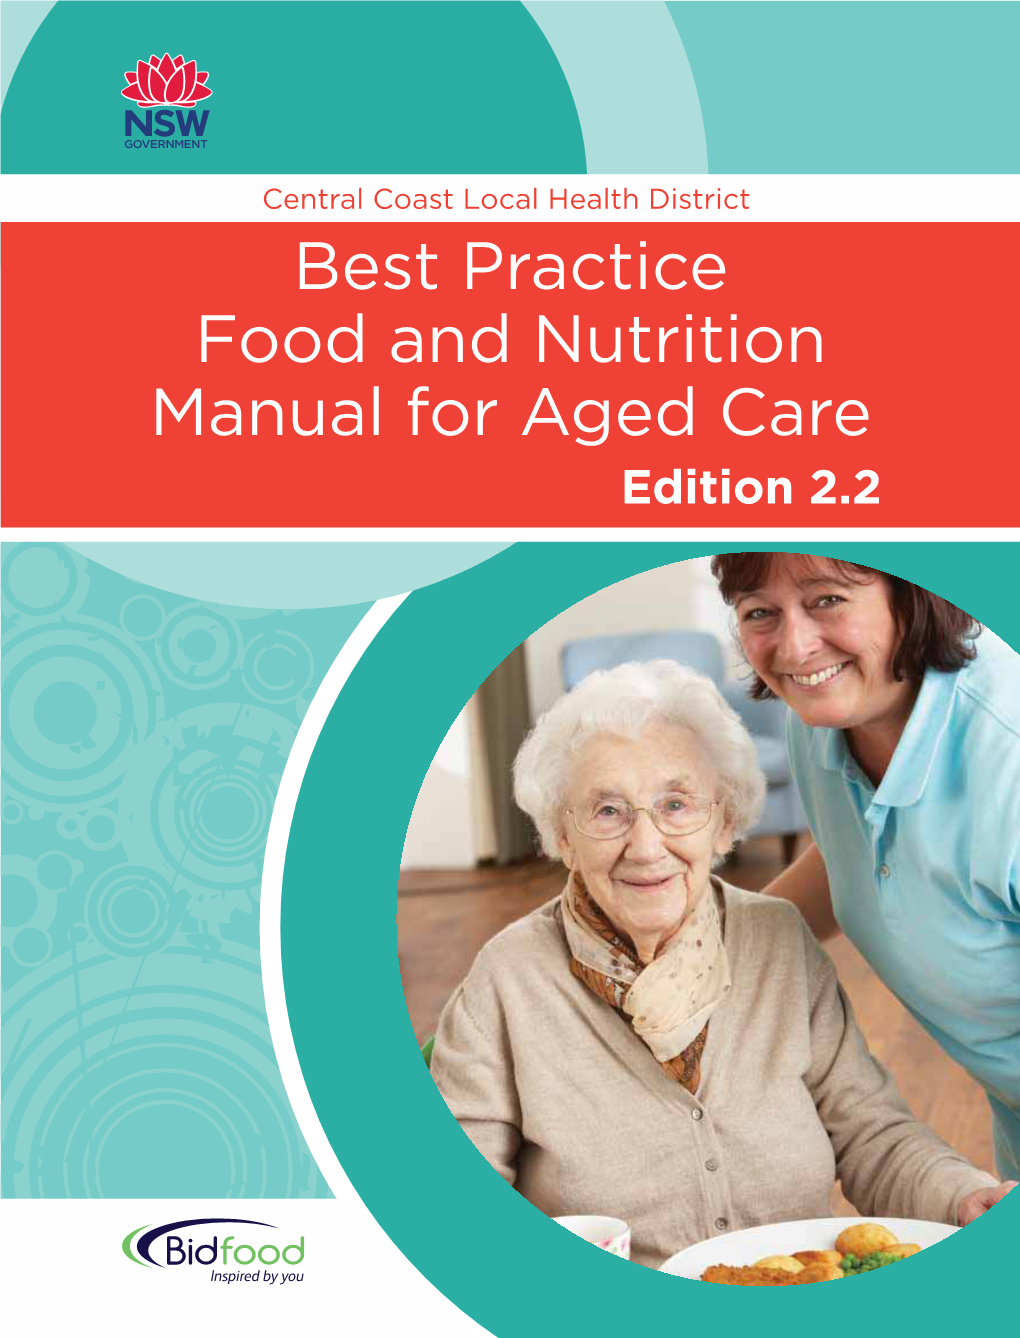 Best Practice Food and Nutrition Manual for Aged Care Edition 2.2 Best Practice Food and Nutrition Manual for Aged Care Homes Edition 2.2